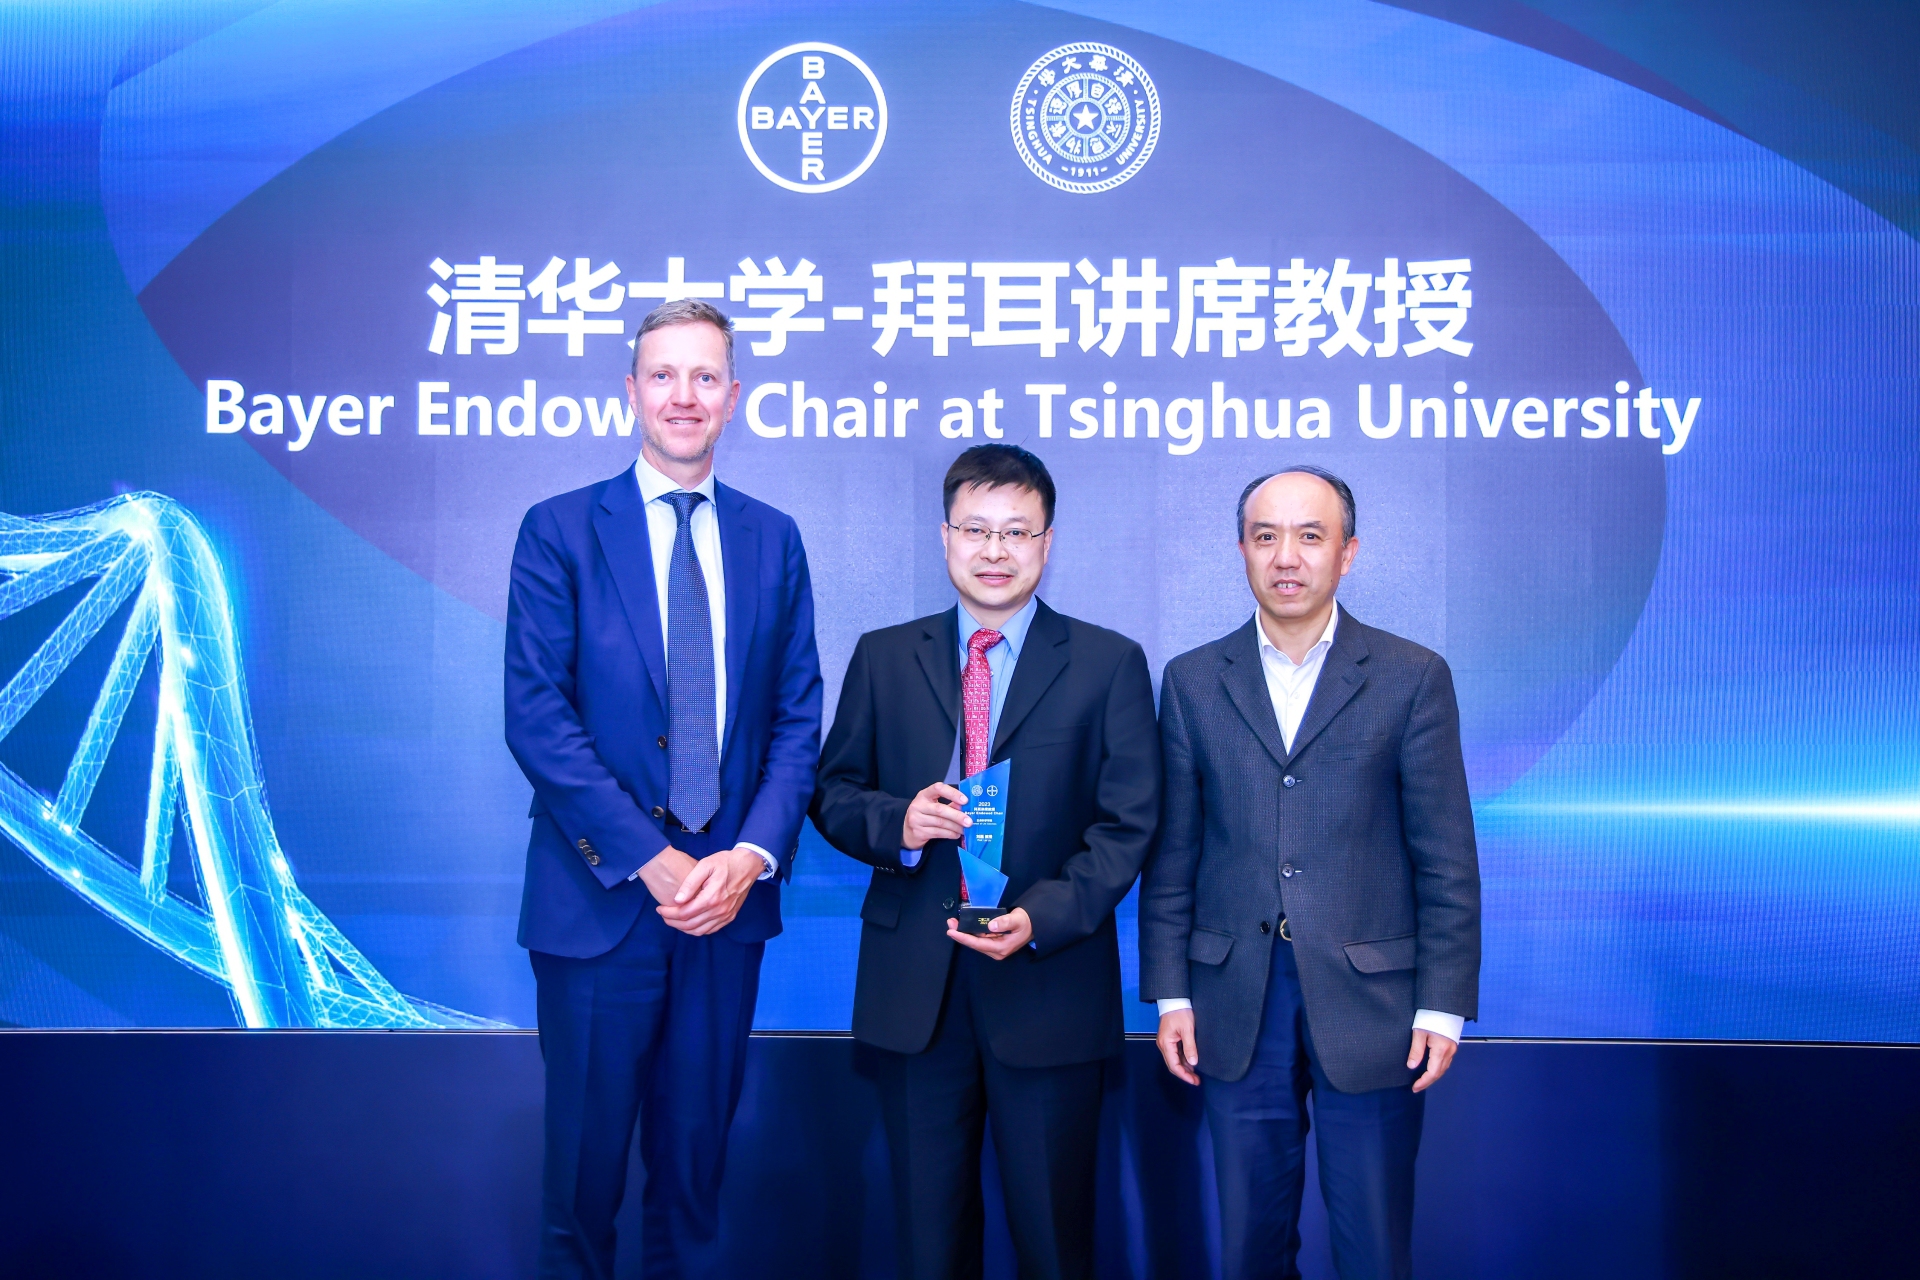 Dr Juergen Eckhardt and Professor Hongwei Wang awarded the Bayer Endowed Chair to Professor Lei Liu from the Department of Chemistry at Tsinghua University.